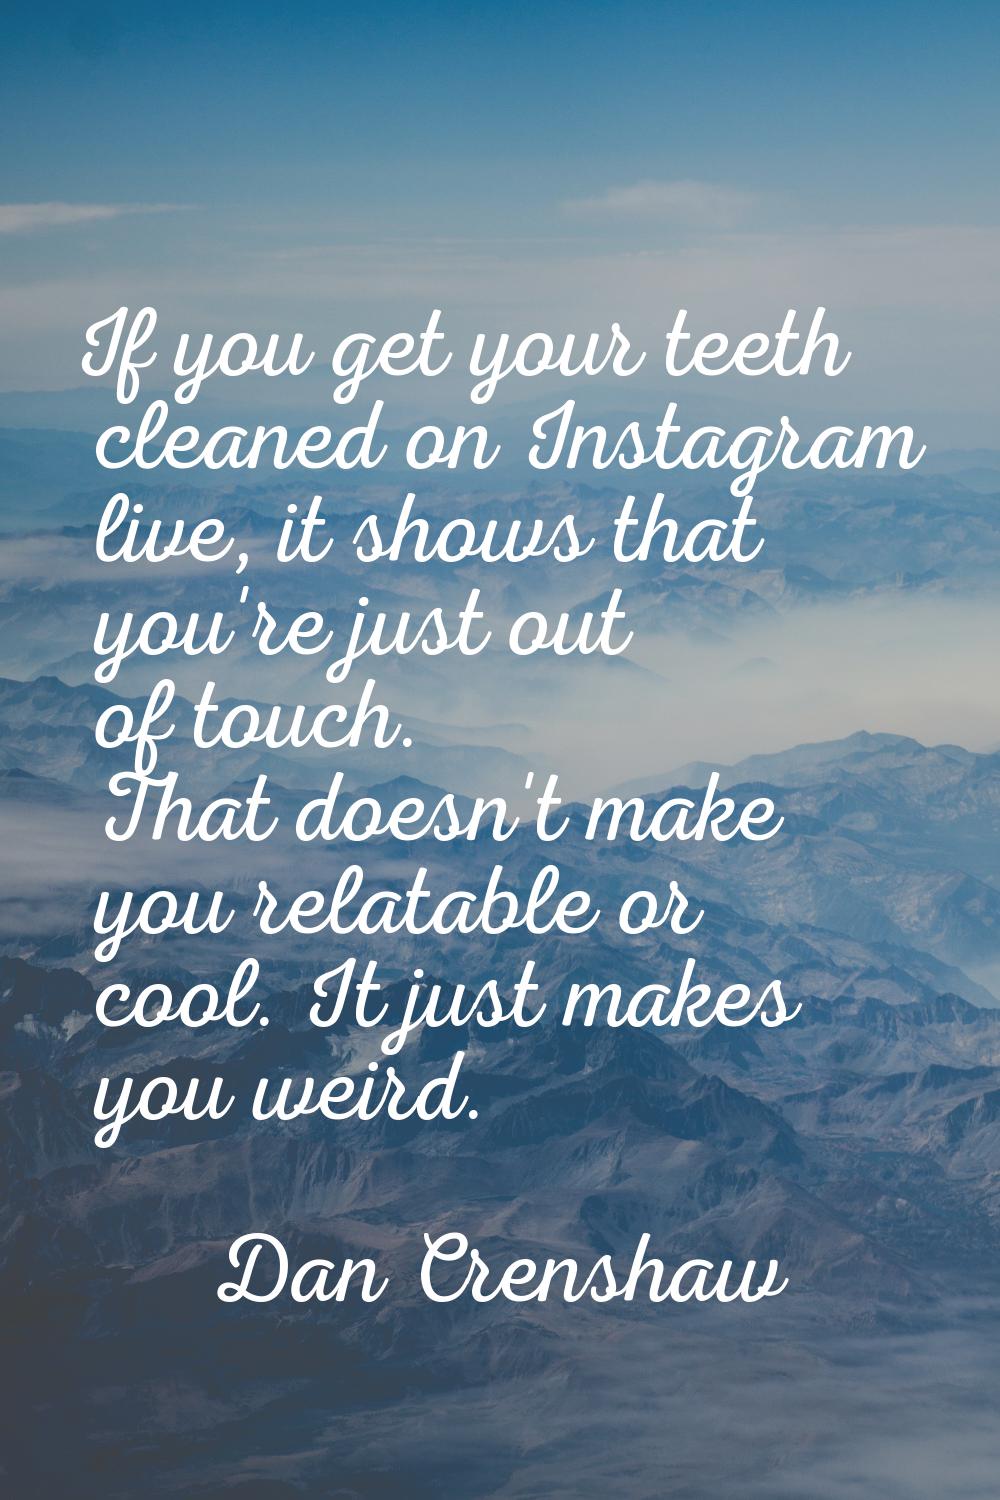 If you get your teeth cleaned on Instagram live, it shows that you're just out of touch. That doesn